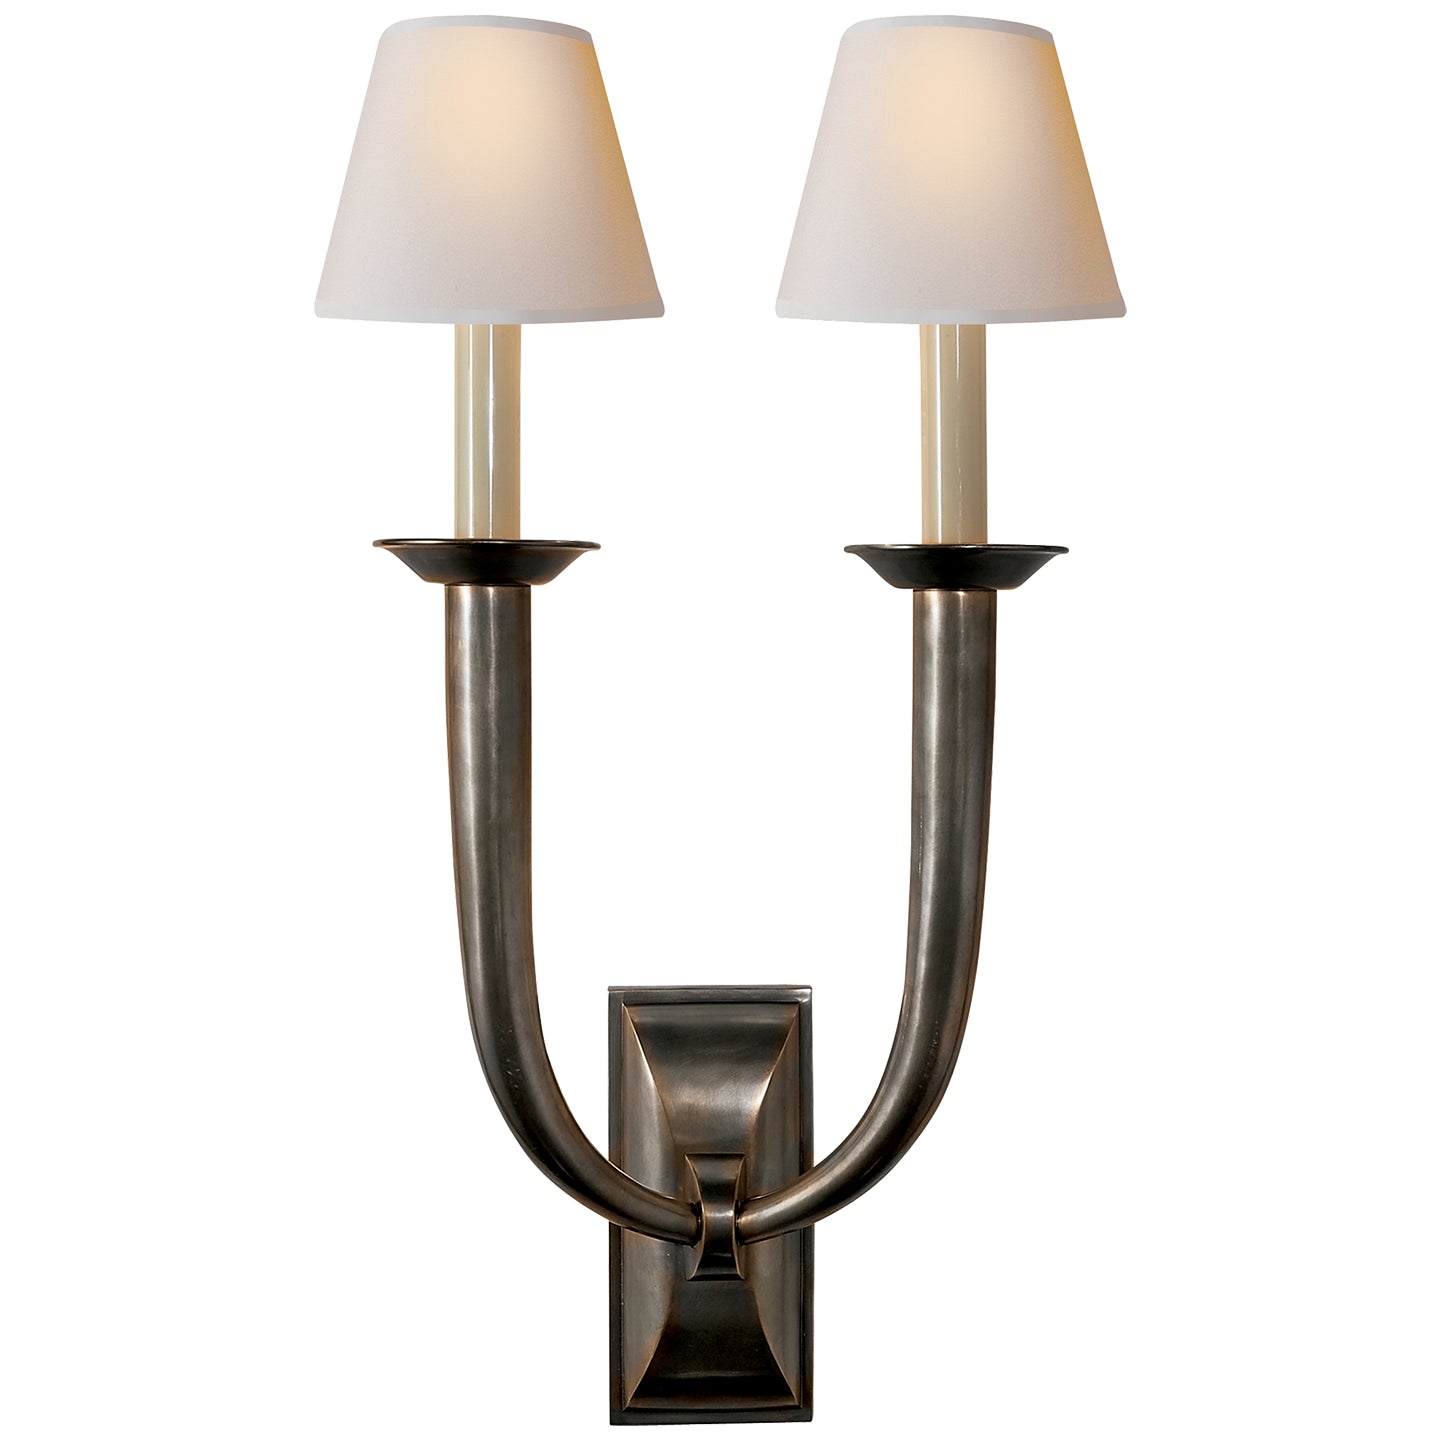 Visual Comfort Signature - S 2021BZ-NP - Two Light Wall Sconce - French Deco Horn - Bronze